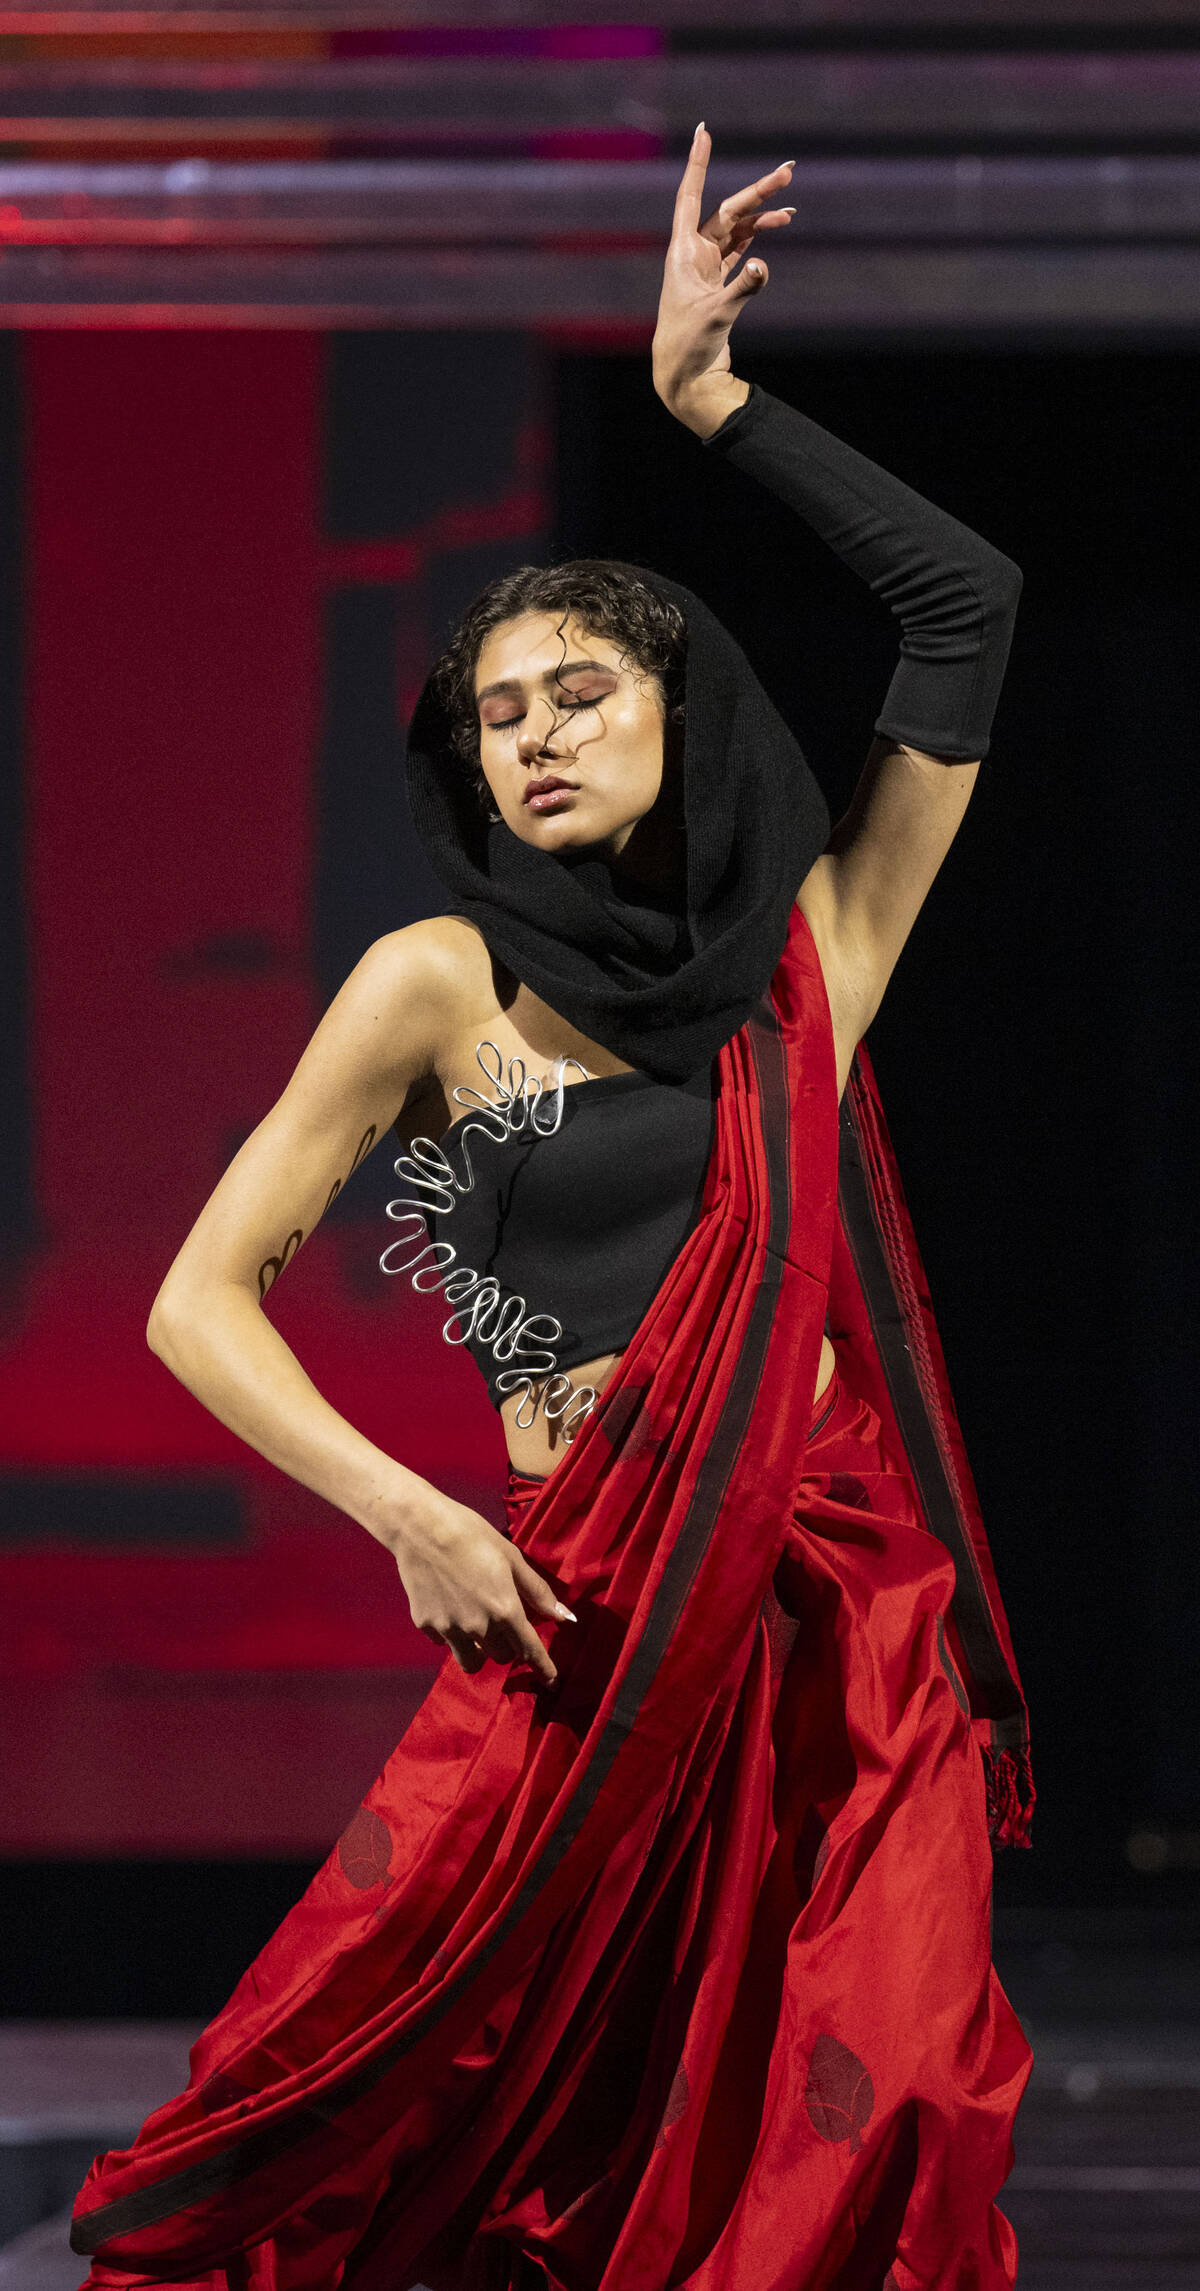 Model wearing black top and silk red pleated garment with curved wire accents.